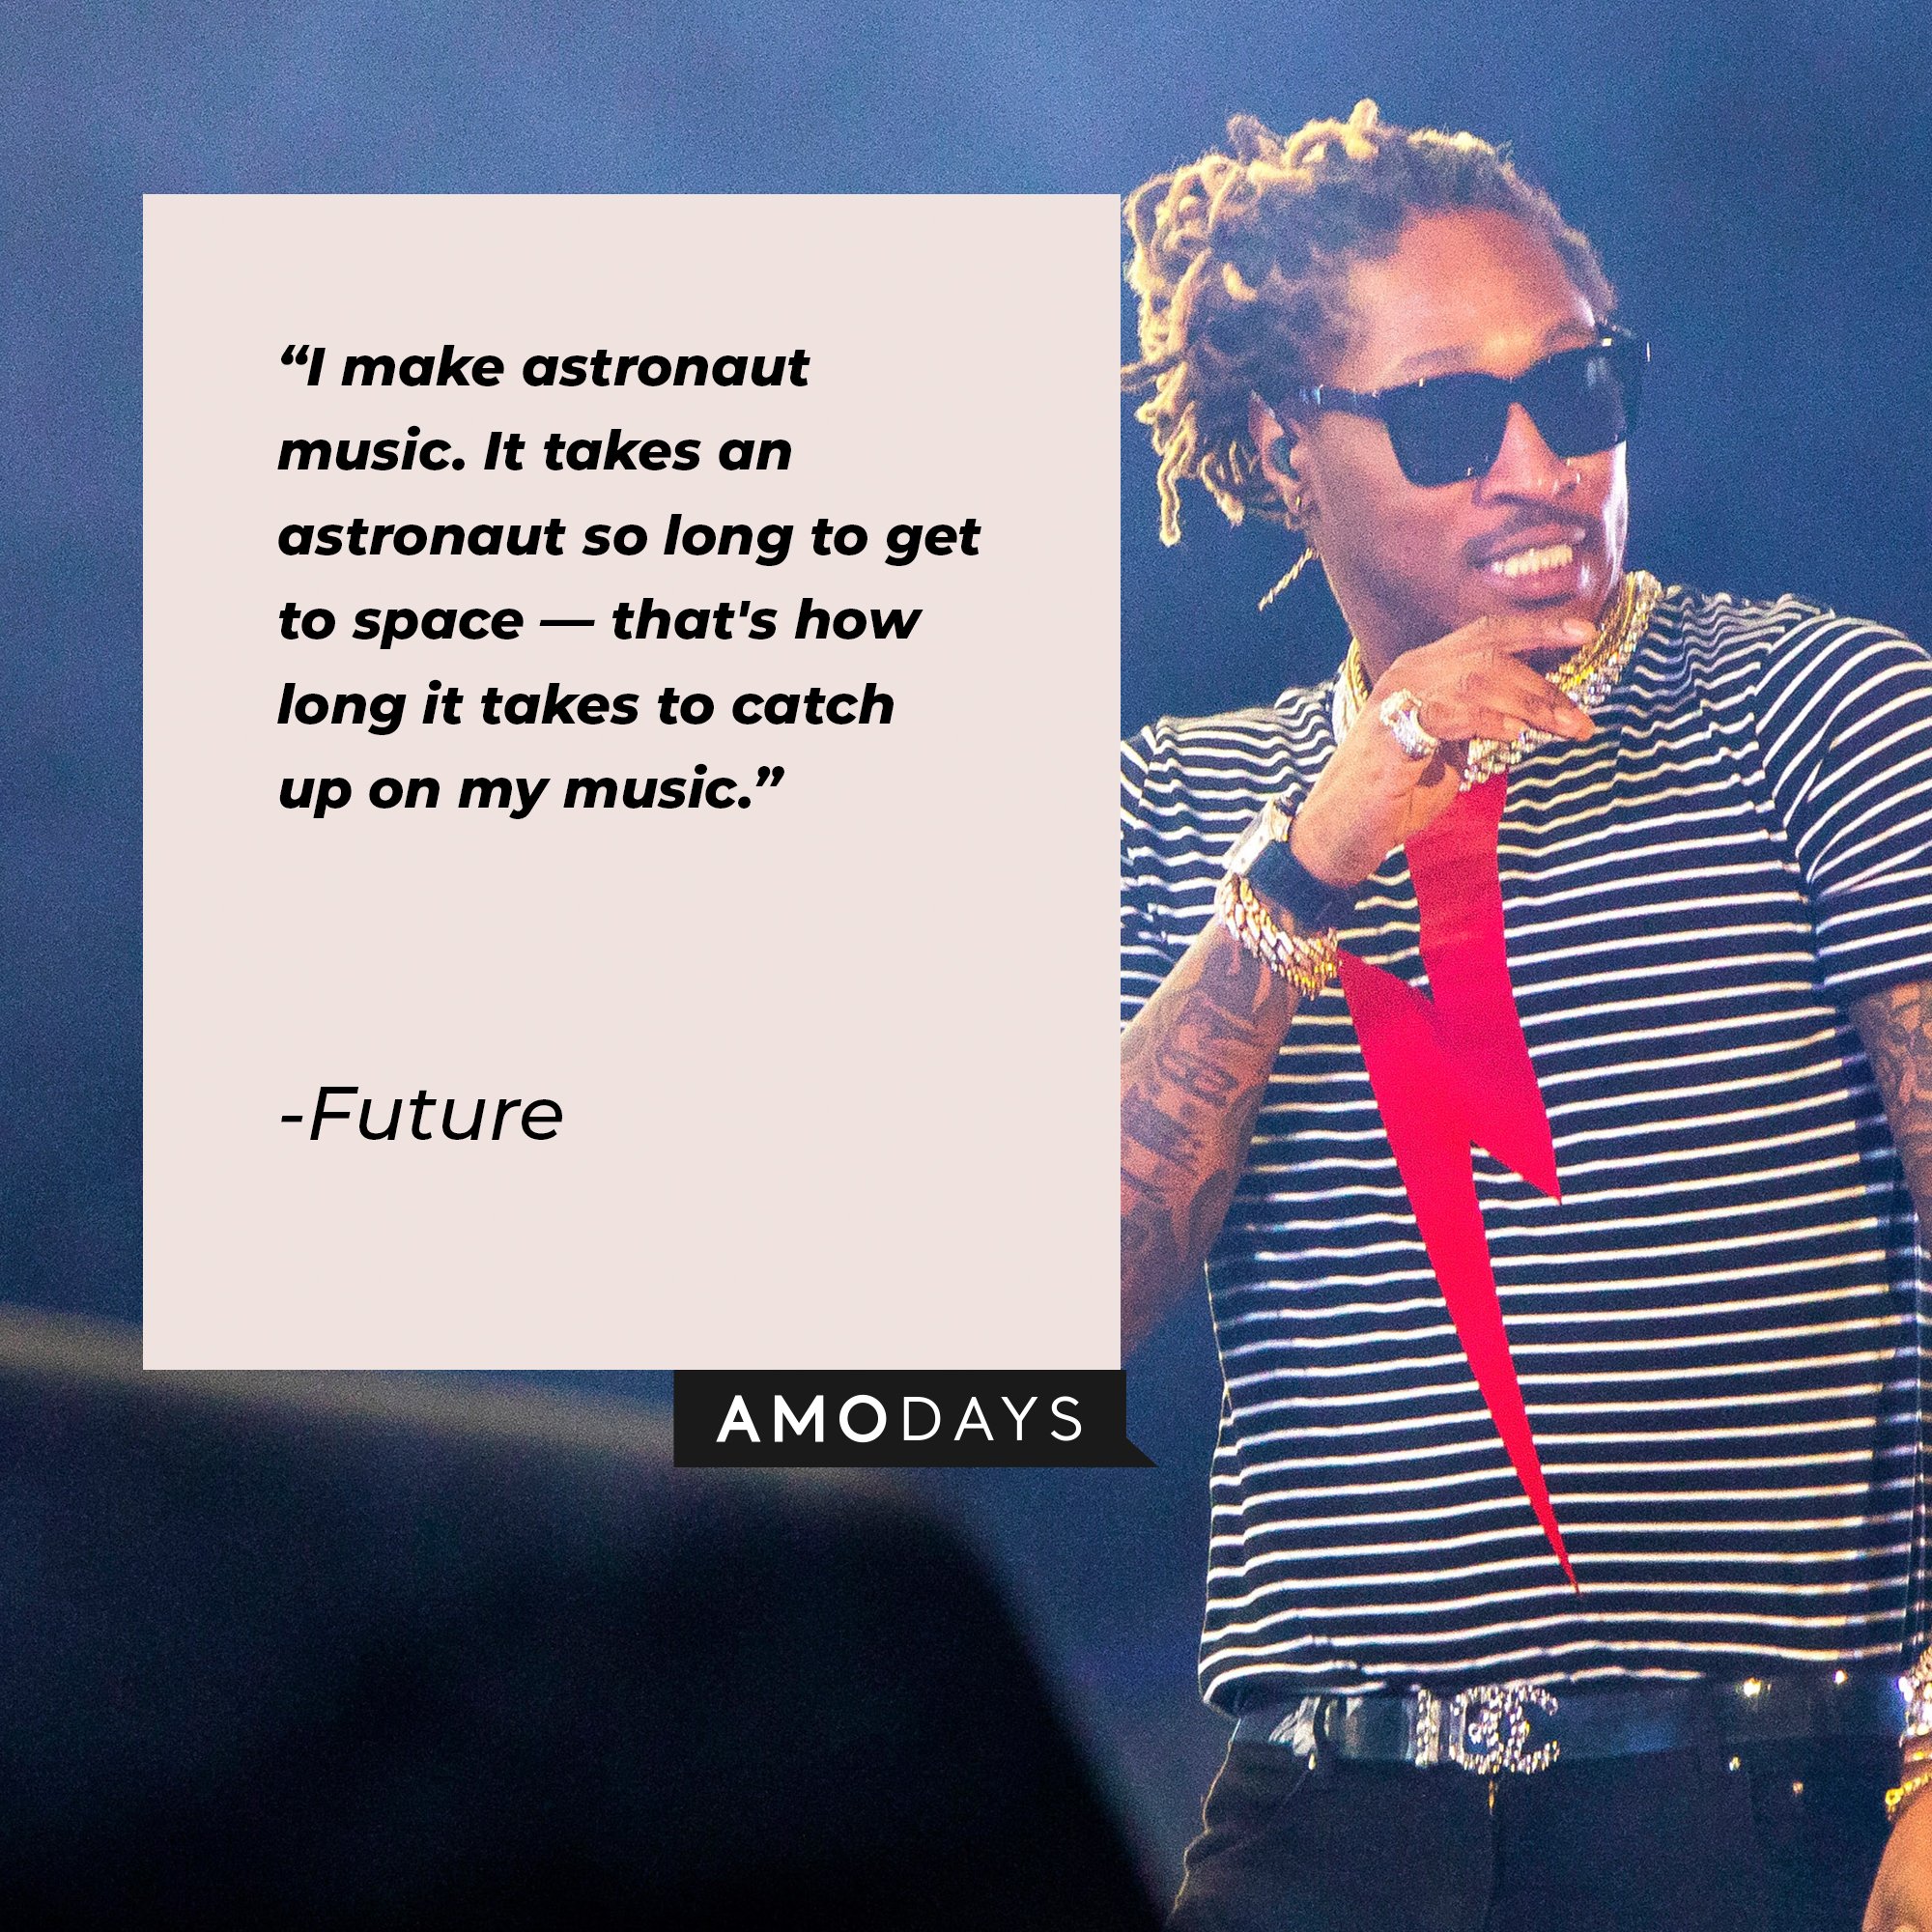 Future's quote: "I make astronaut music. It takes an astronaut so long to get to space—that's how long it takes to catch up on my music." | Image: AmoDays